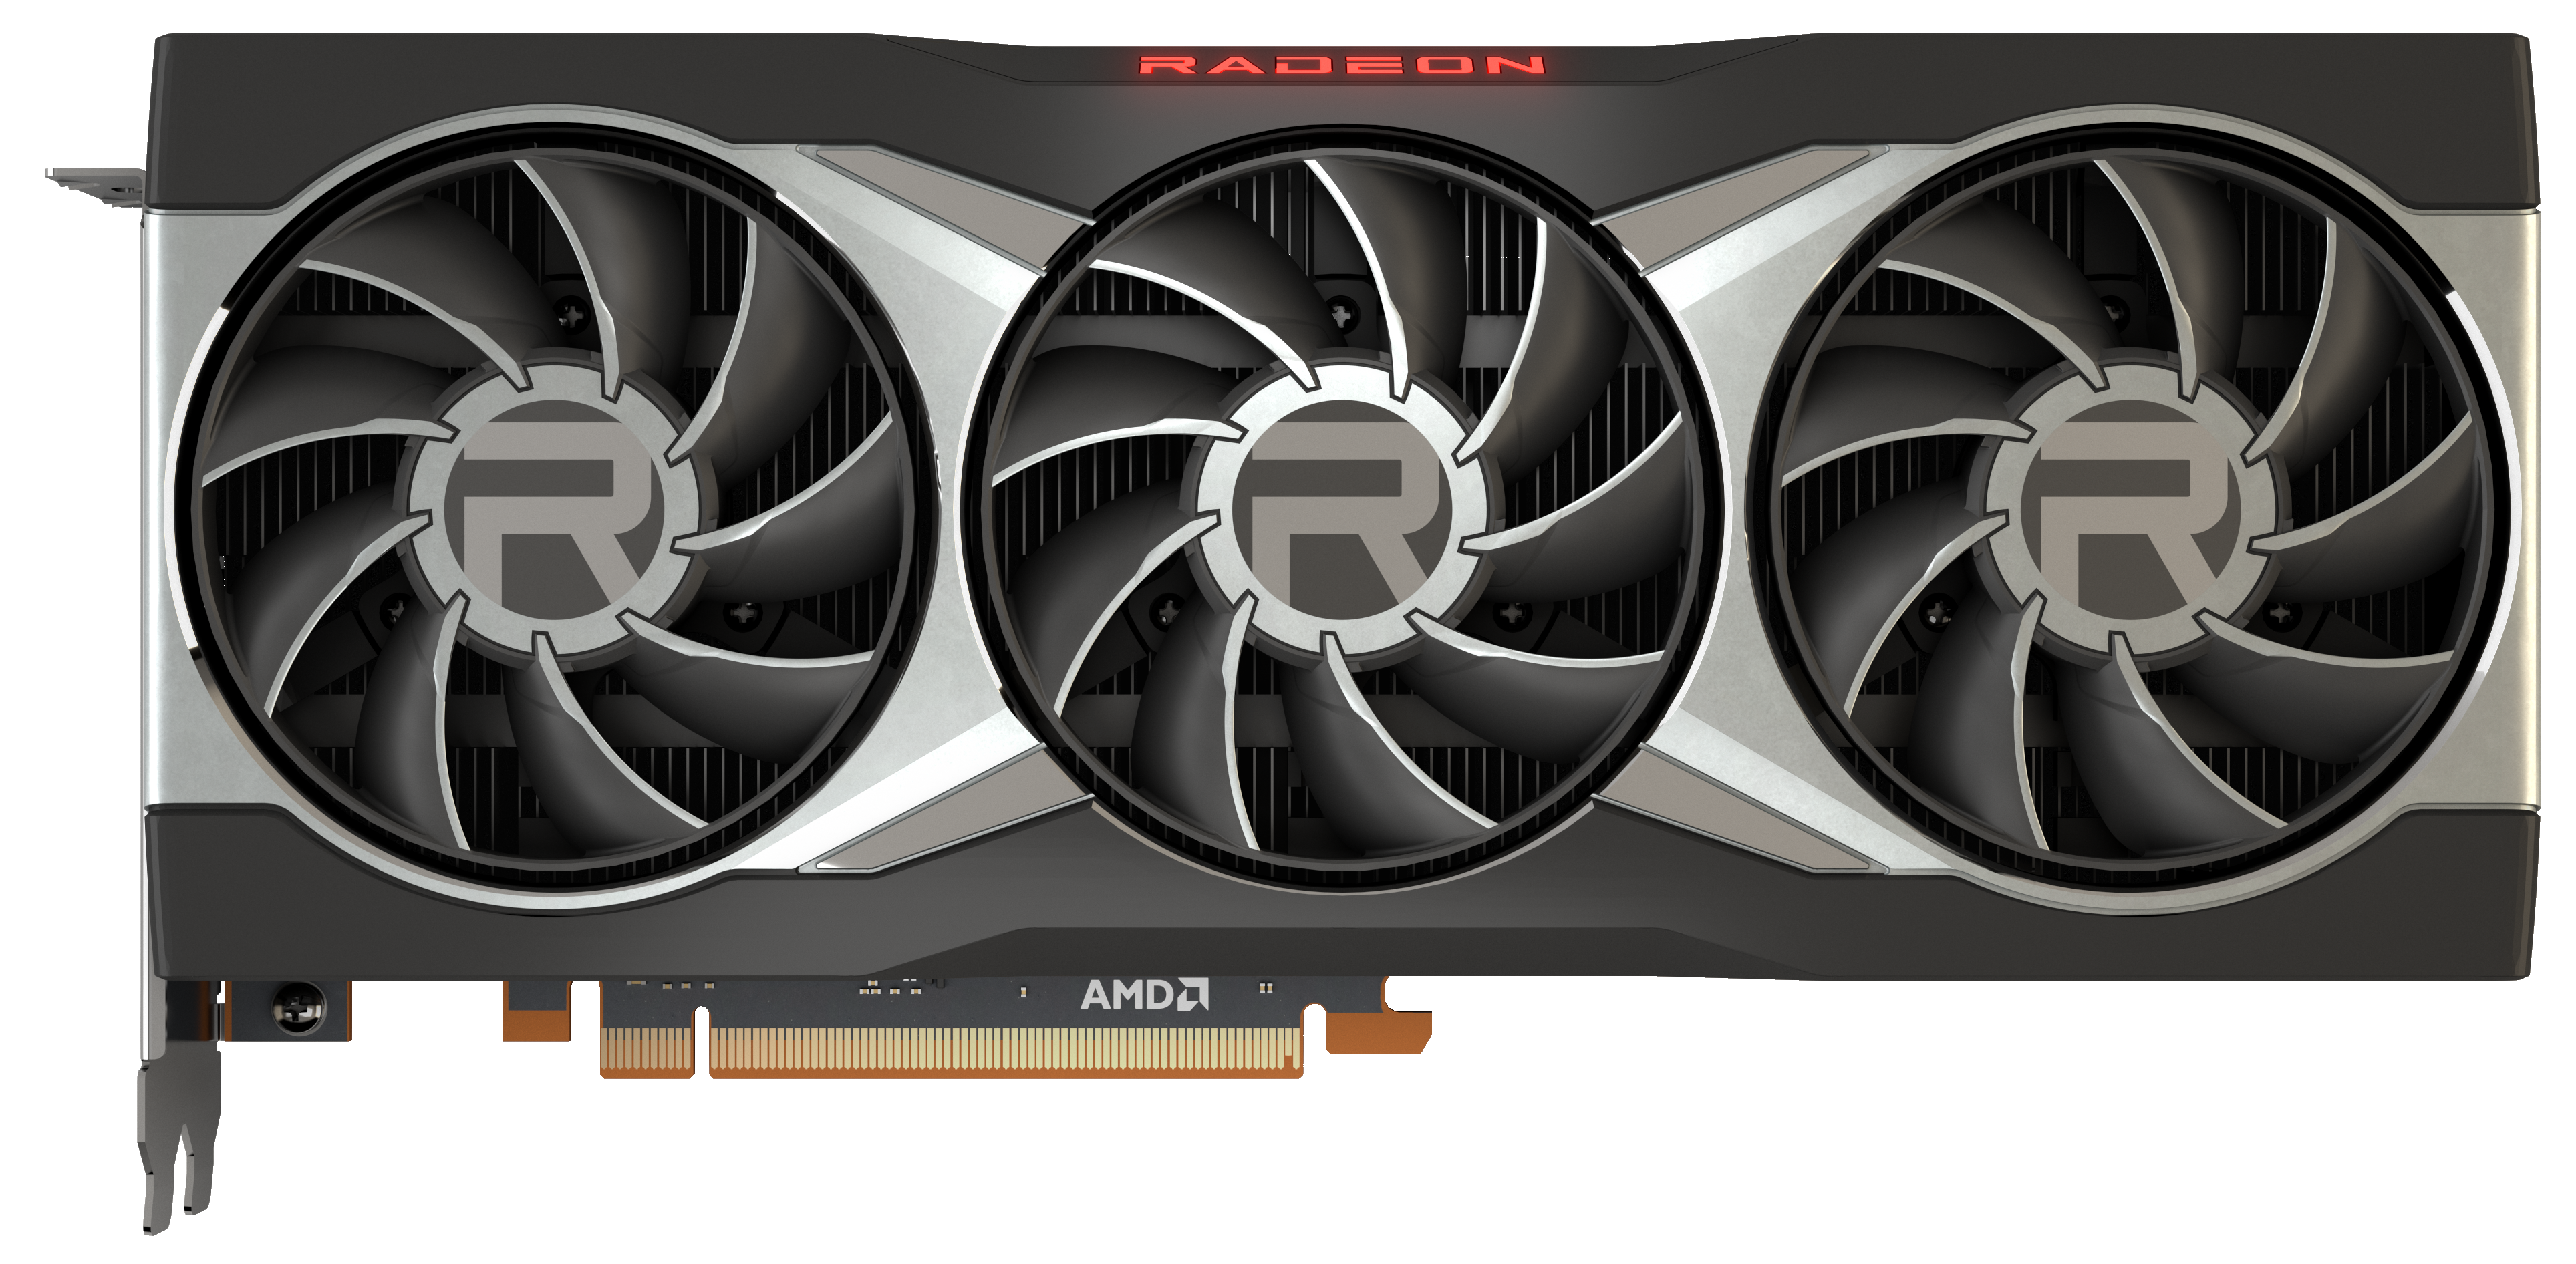 AMD RX 6900 XT launch, challenges Nvidia's flagship RTX 3090